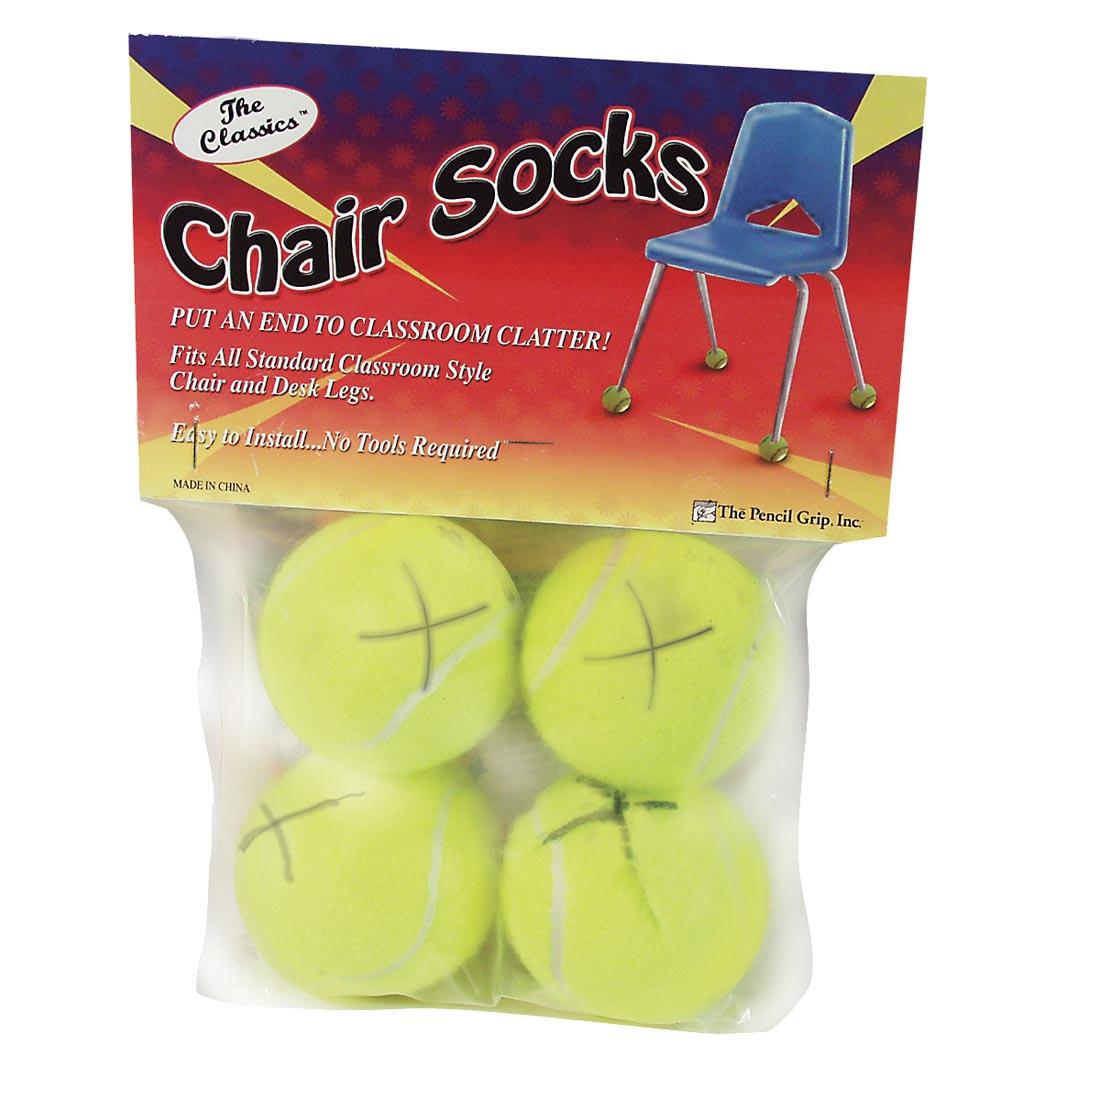 The Classics Chair Socks in package